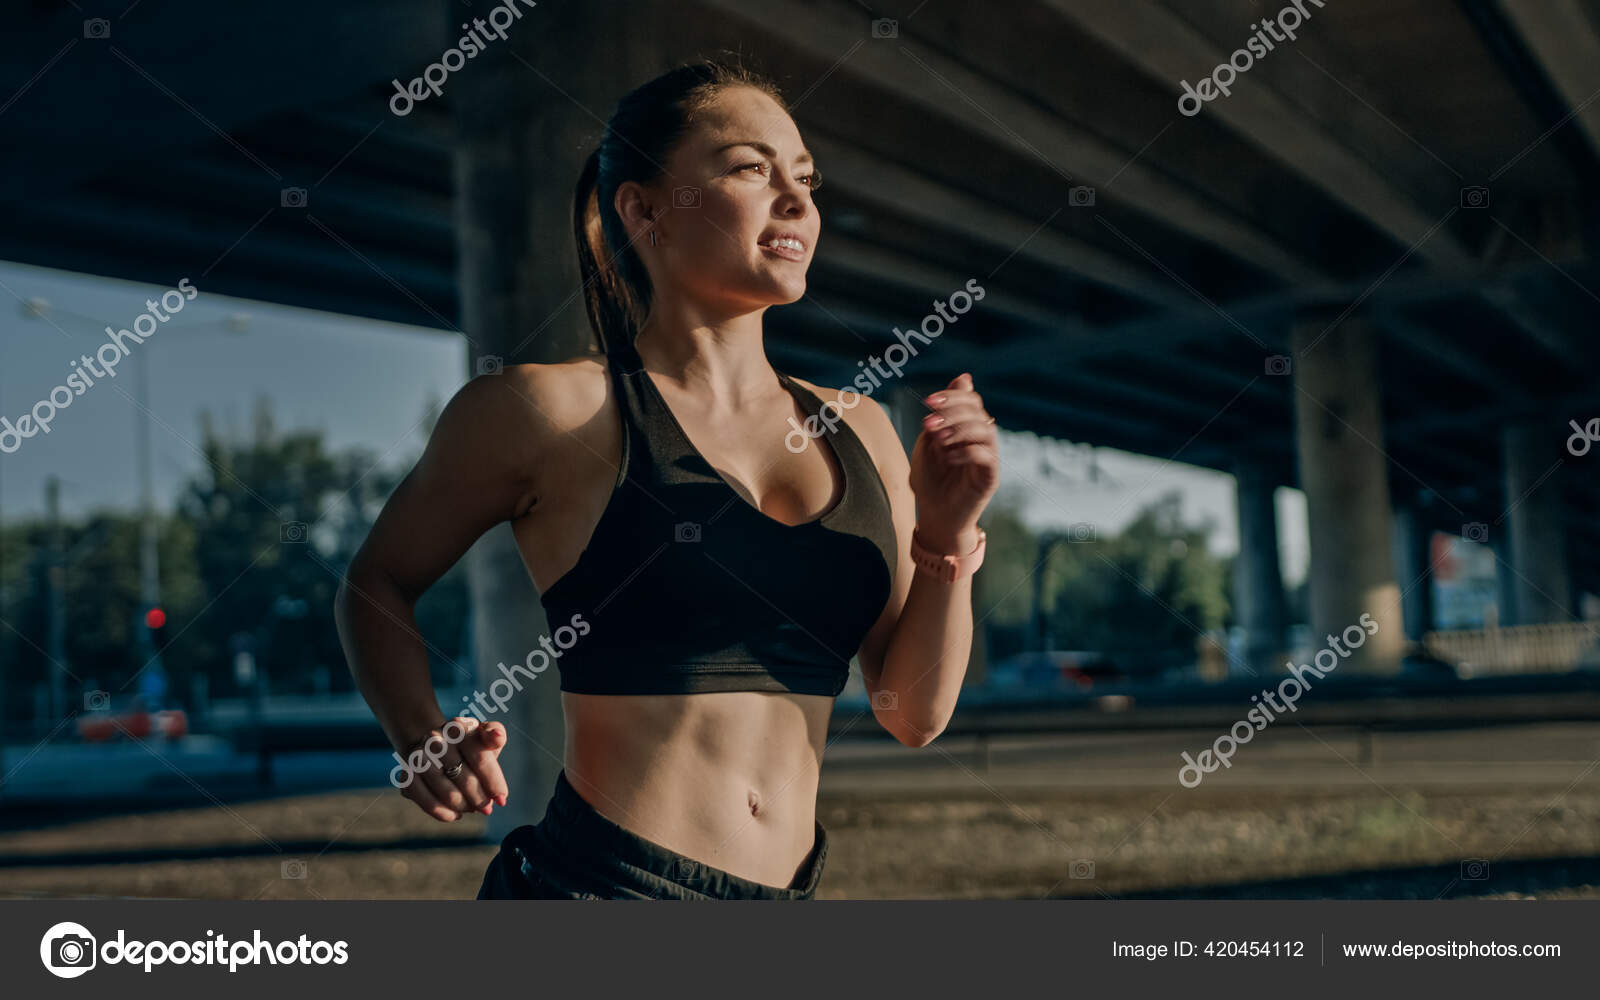 Strong and Fit Beautiful Busty Girl in an Athletic Top is Posing After a  Workout at Home in Her Spacious and Sunny Living Room with Minimalistic  Interior. Stock Photo